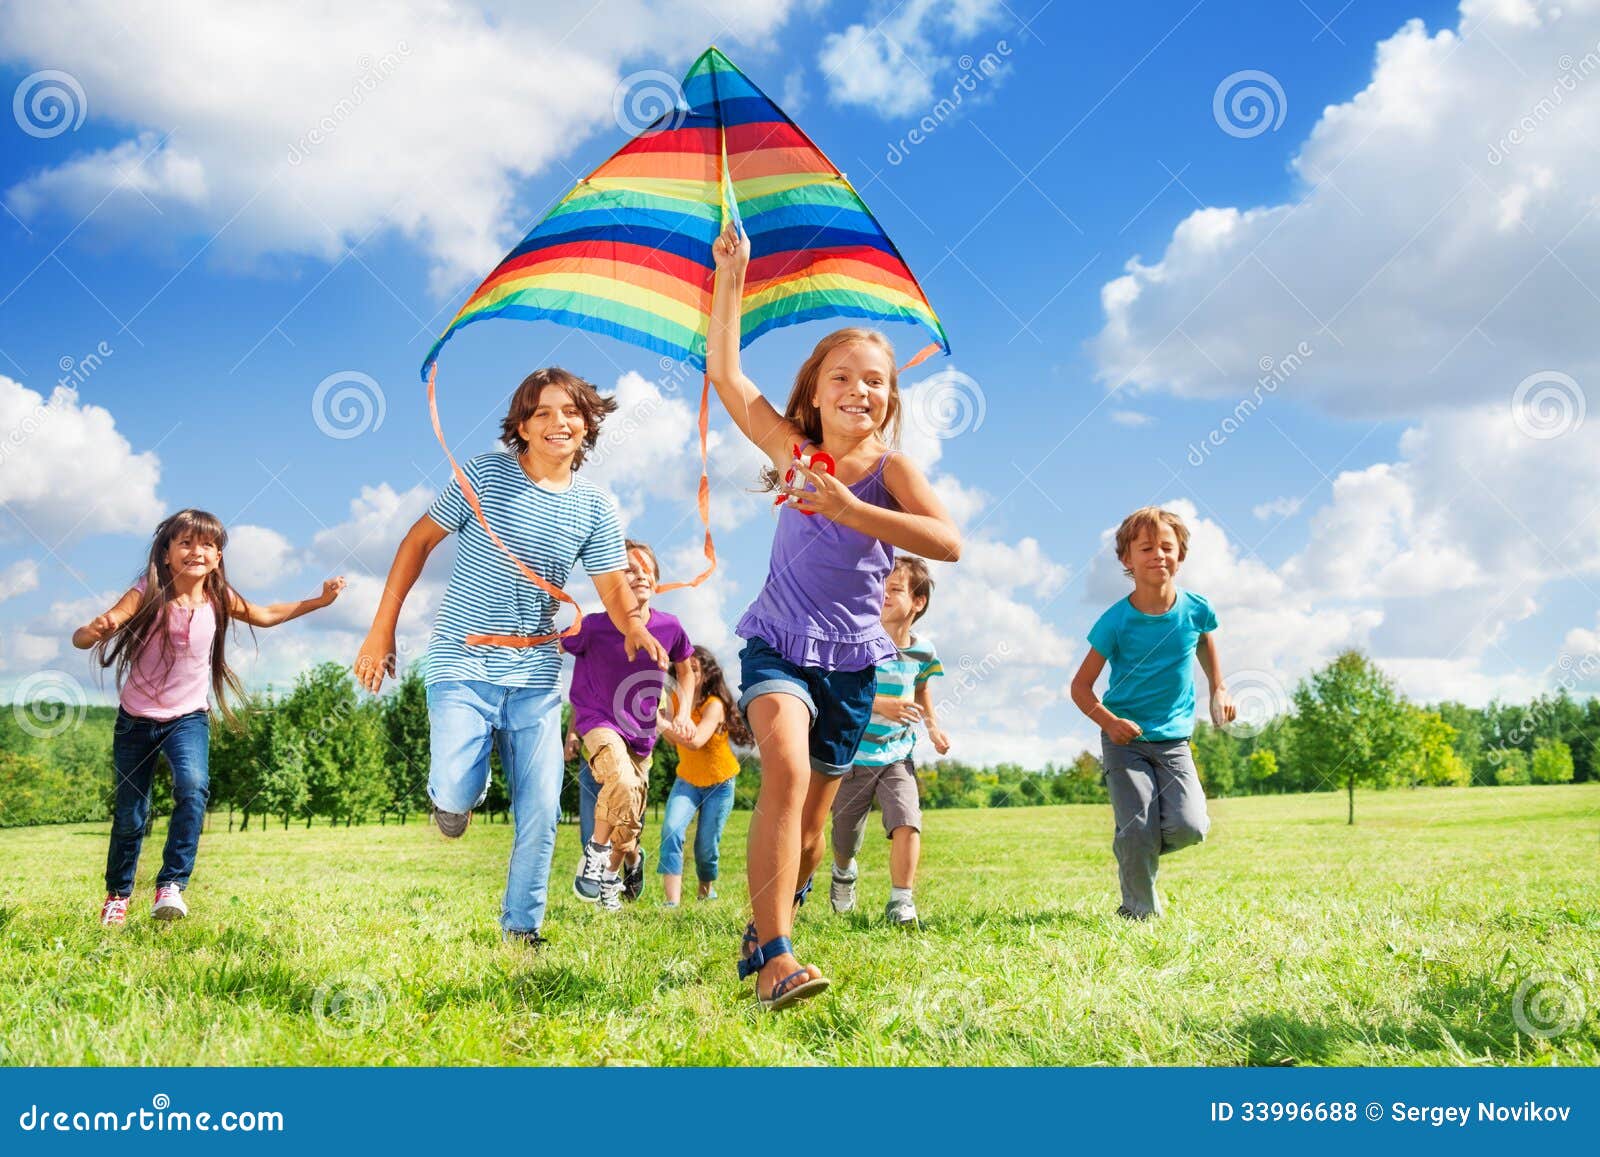 many active kids with kite